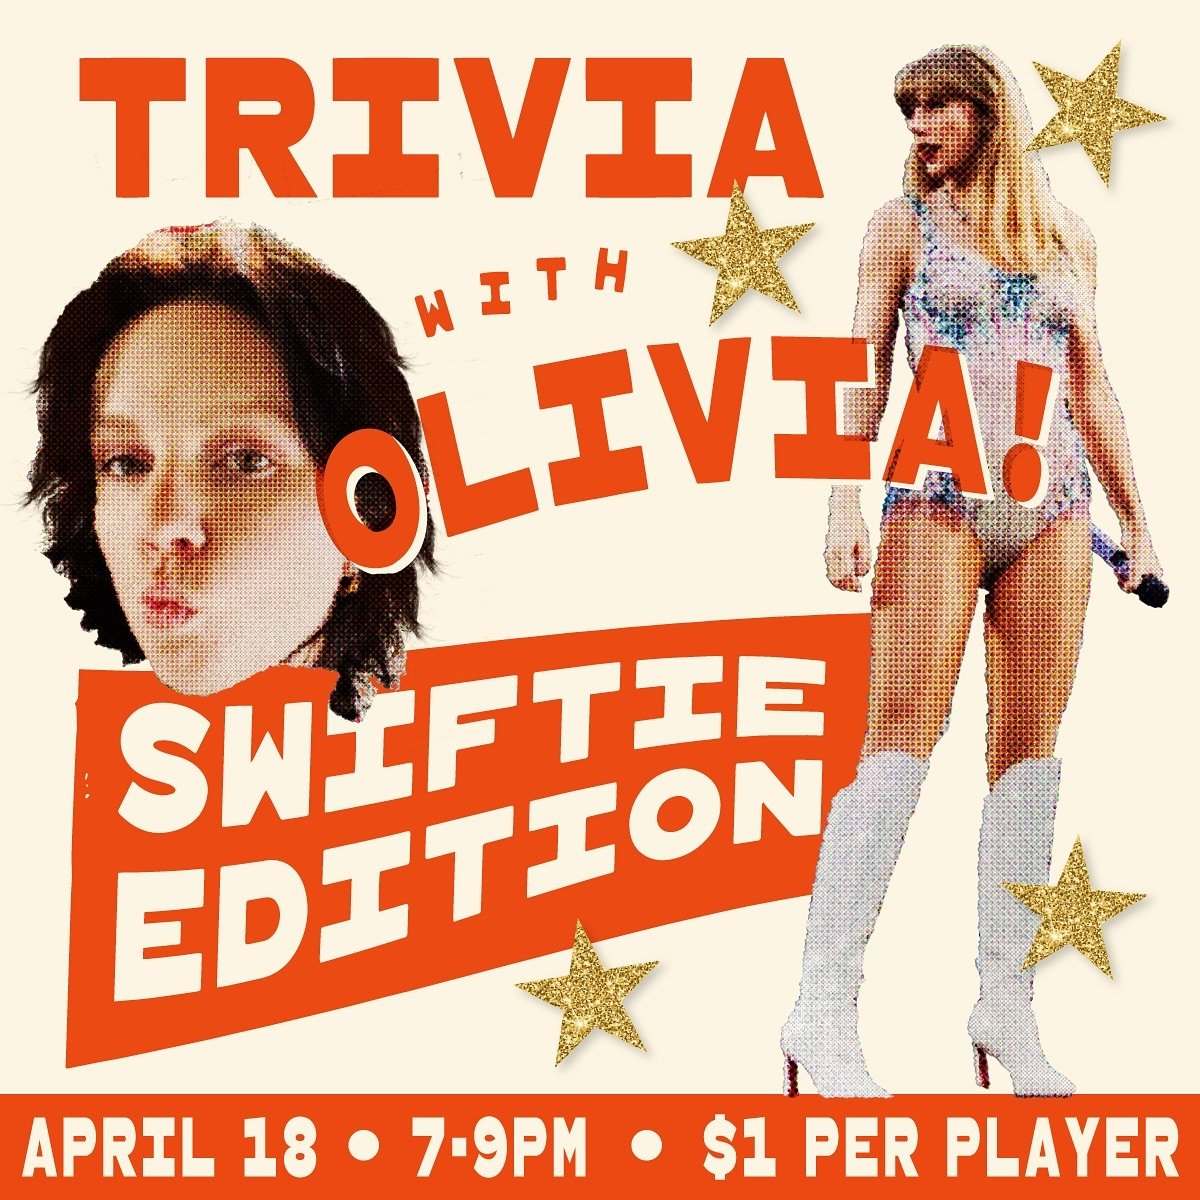 Trivia with Olivia is this Thursday! Join the Swiftest of us all with some of the toughest questions Olivia could assemble. It&rsquo;s $1 to play and there&rsquo;ll be prizes for 1st place, 2nd place, and best team name.

Today is also the last *offi